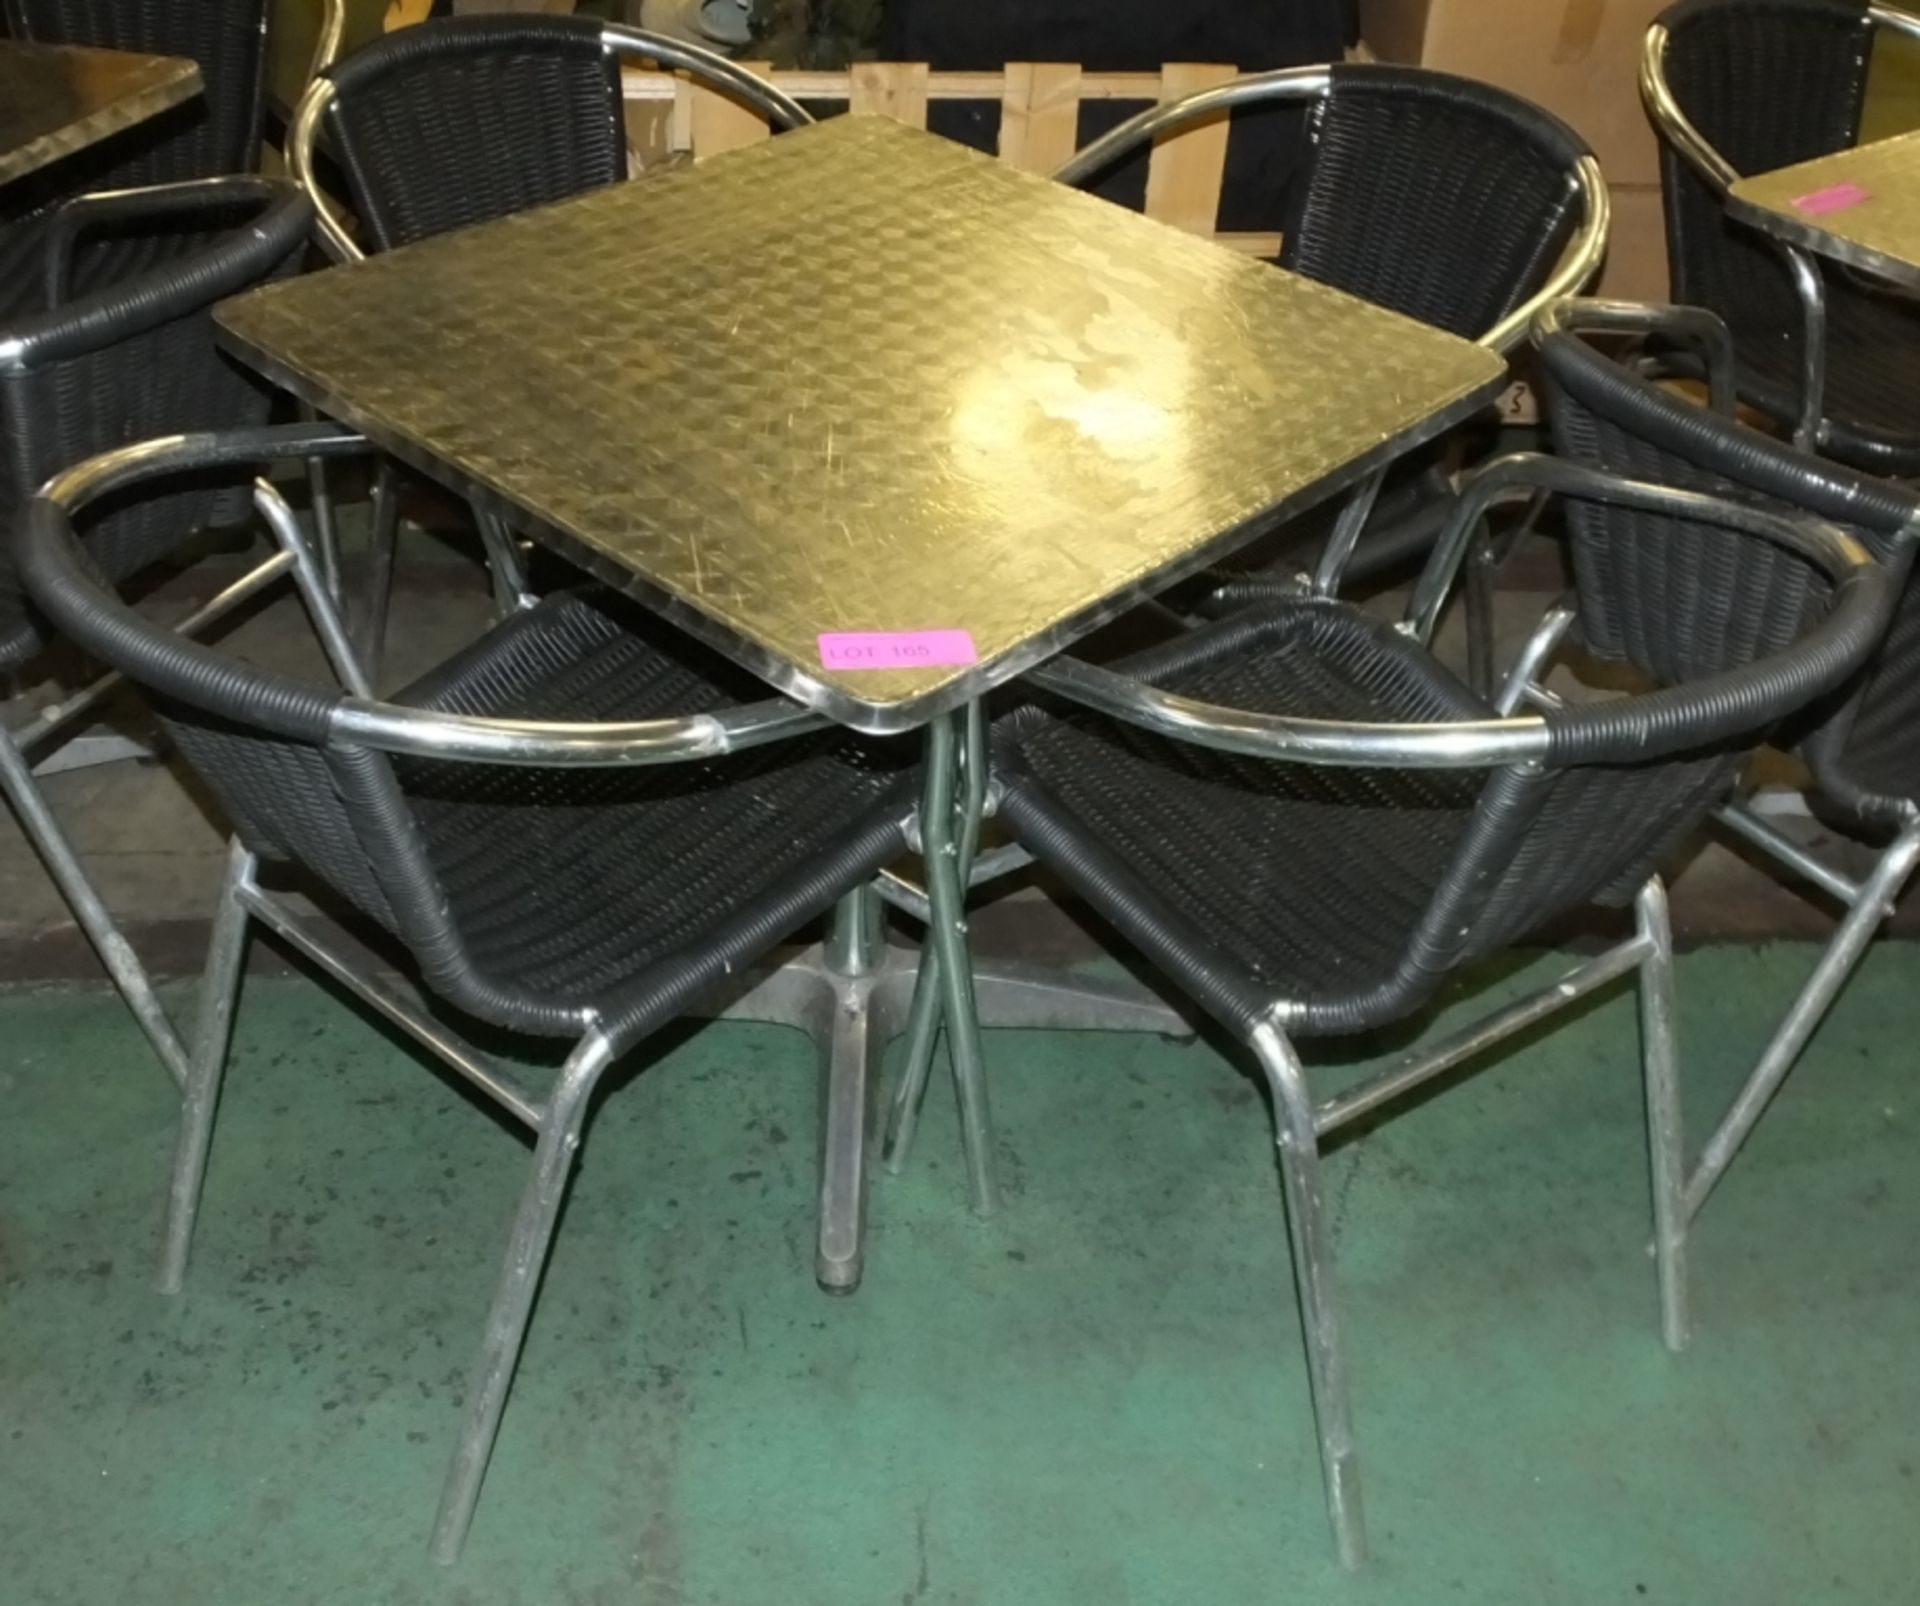 2ft metal table with 4 chairs